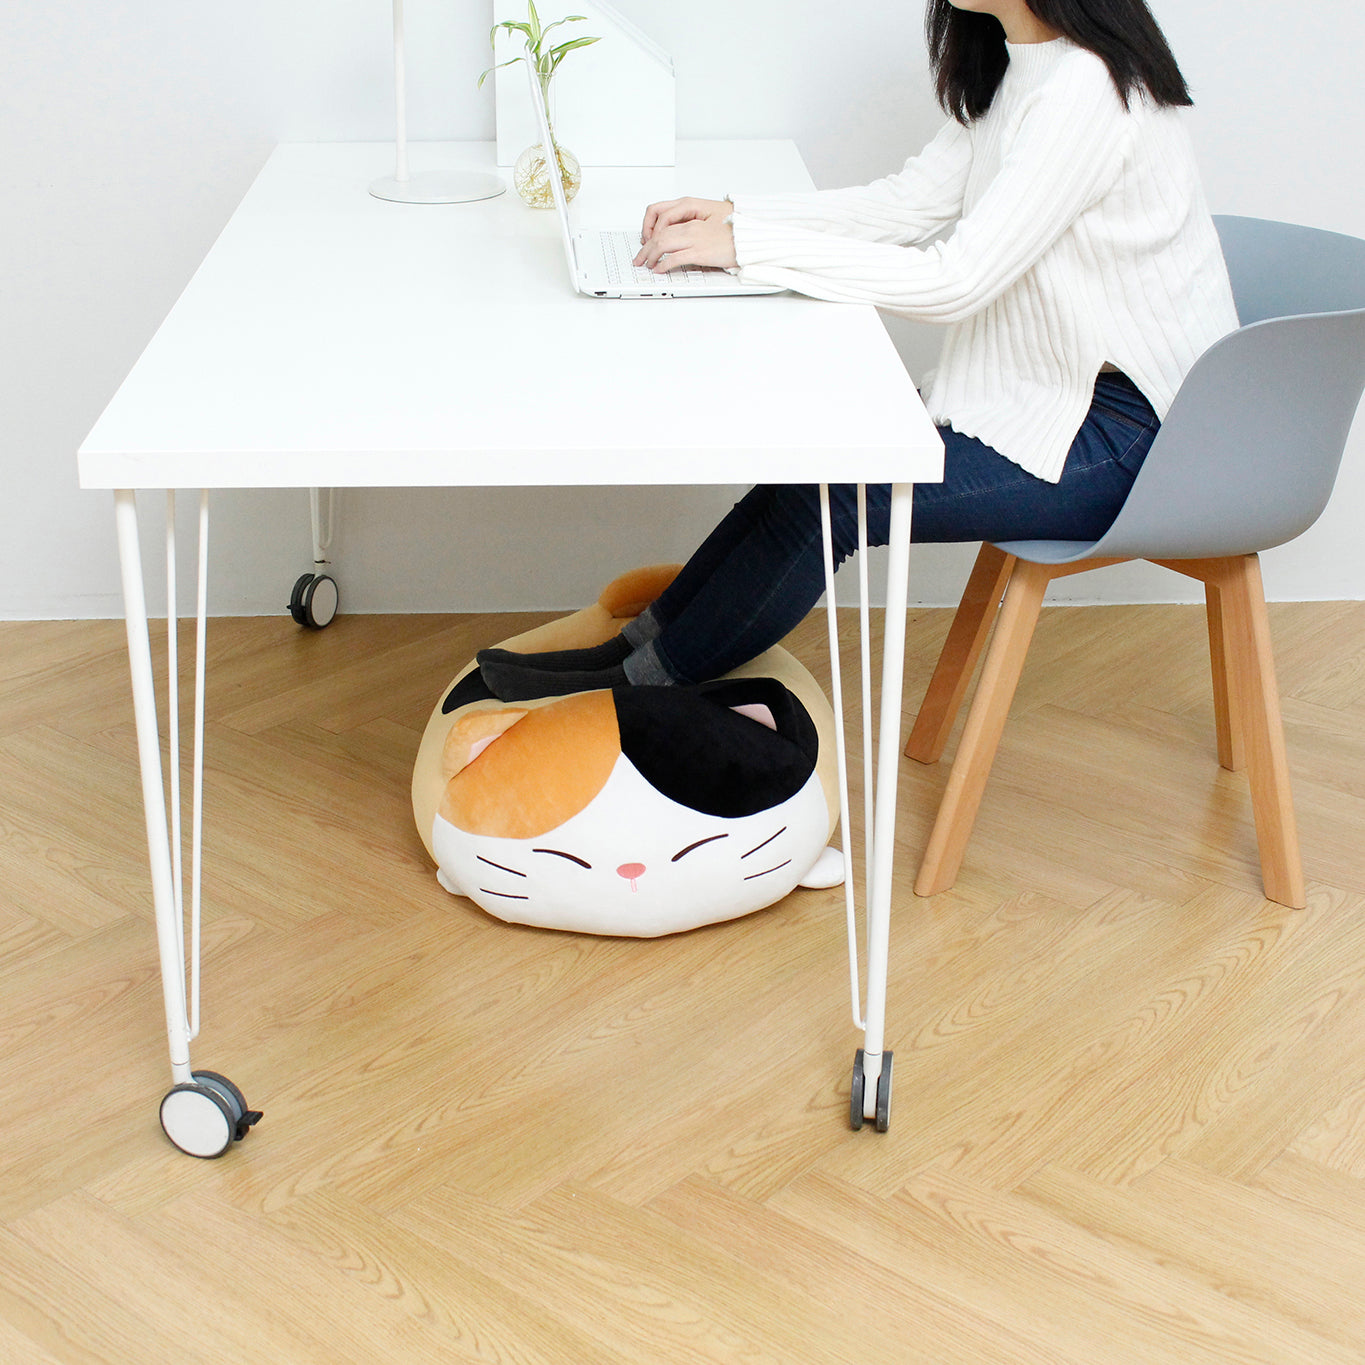 Side view of model sitting at desk using their laptop with their feet propped up on Camang pillow.